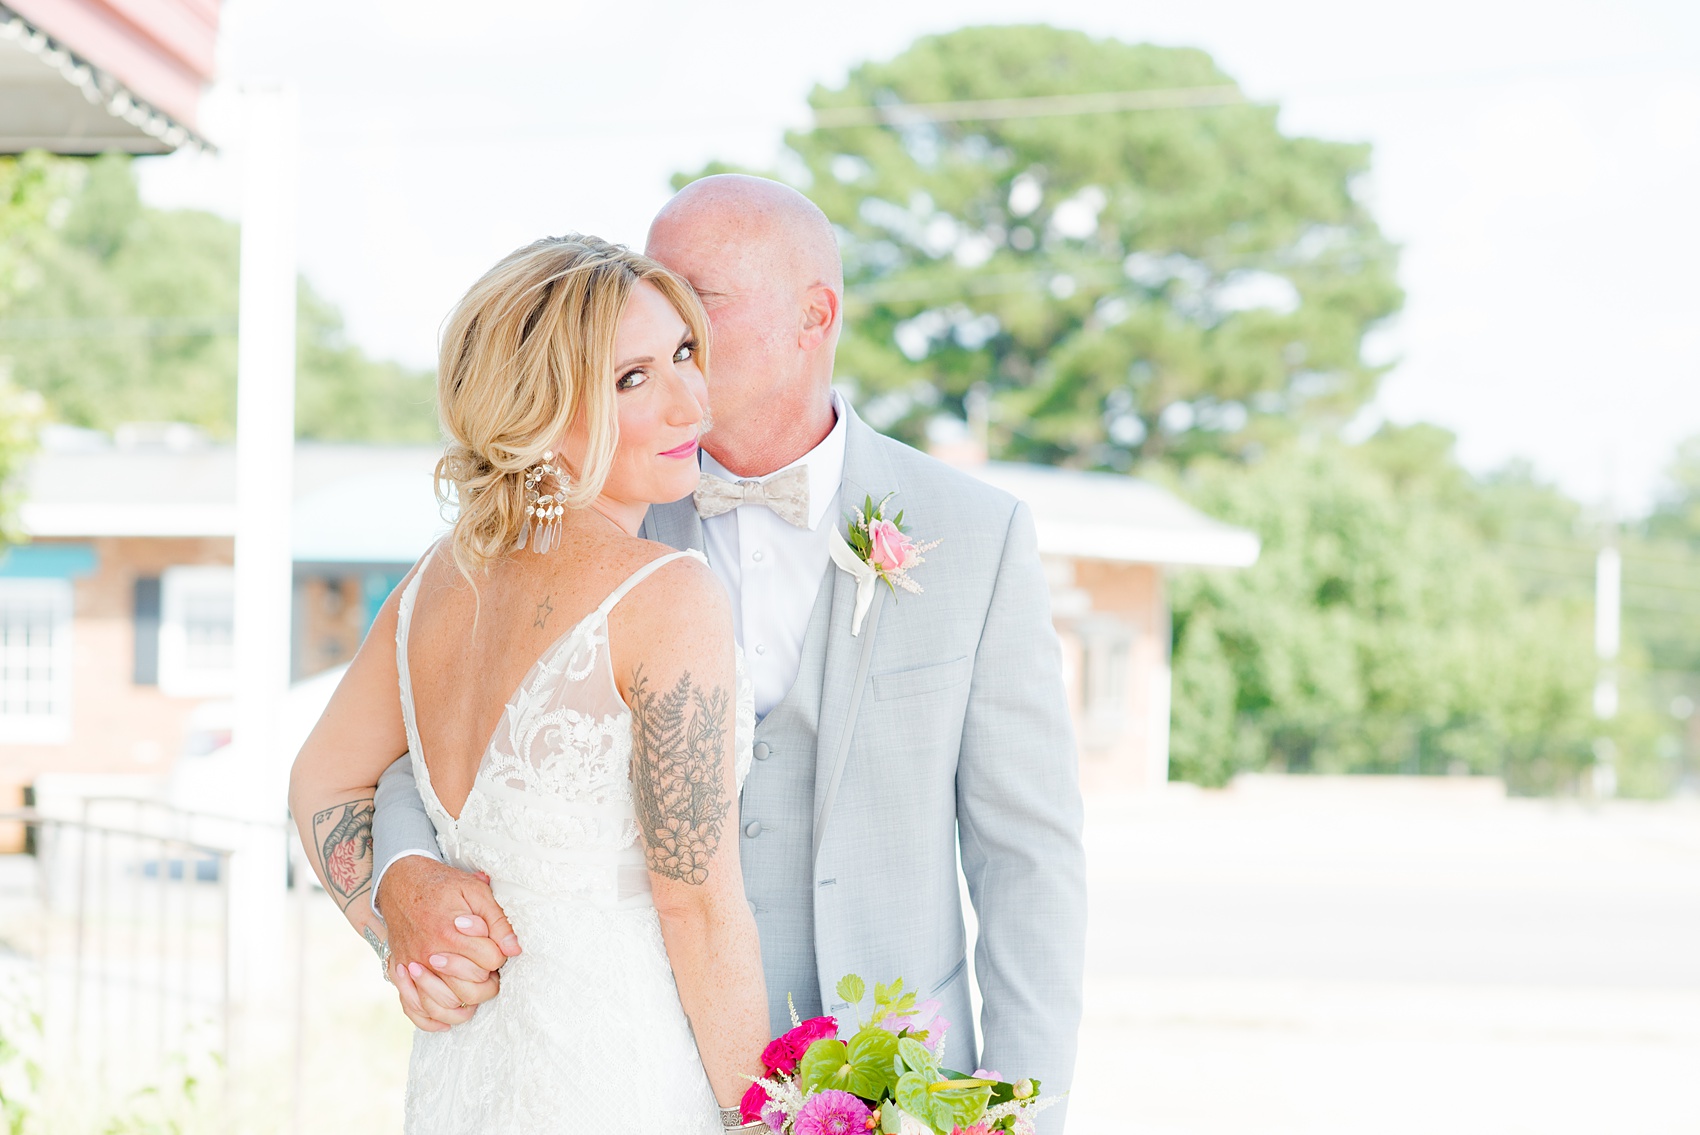 Highgrove Estate wedding photos in North Carolina by Mikkel Paige Photography. This tattooed bride + her groom groom wanted rustic, urban pictures in downtown Fuquay-Varina, near Raleigh. They had a pink + green palette, planned by @asouthernsoiree, with tropical flowers and balloons for their tented dinner. Click through for all the details for their awesome party! #NorthCarolinaVenues #WeddingVenues #MikkelPaige #ASouthernSoiree #tropicalflowers #brideandgroom #tattooedbride #weddingdetails